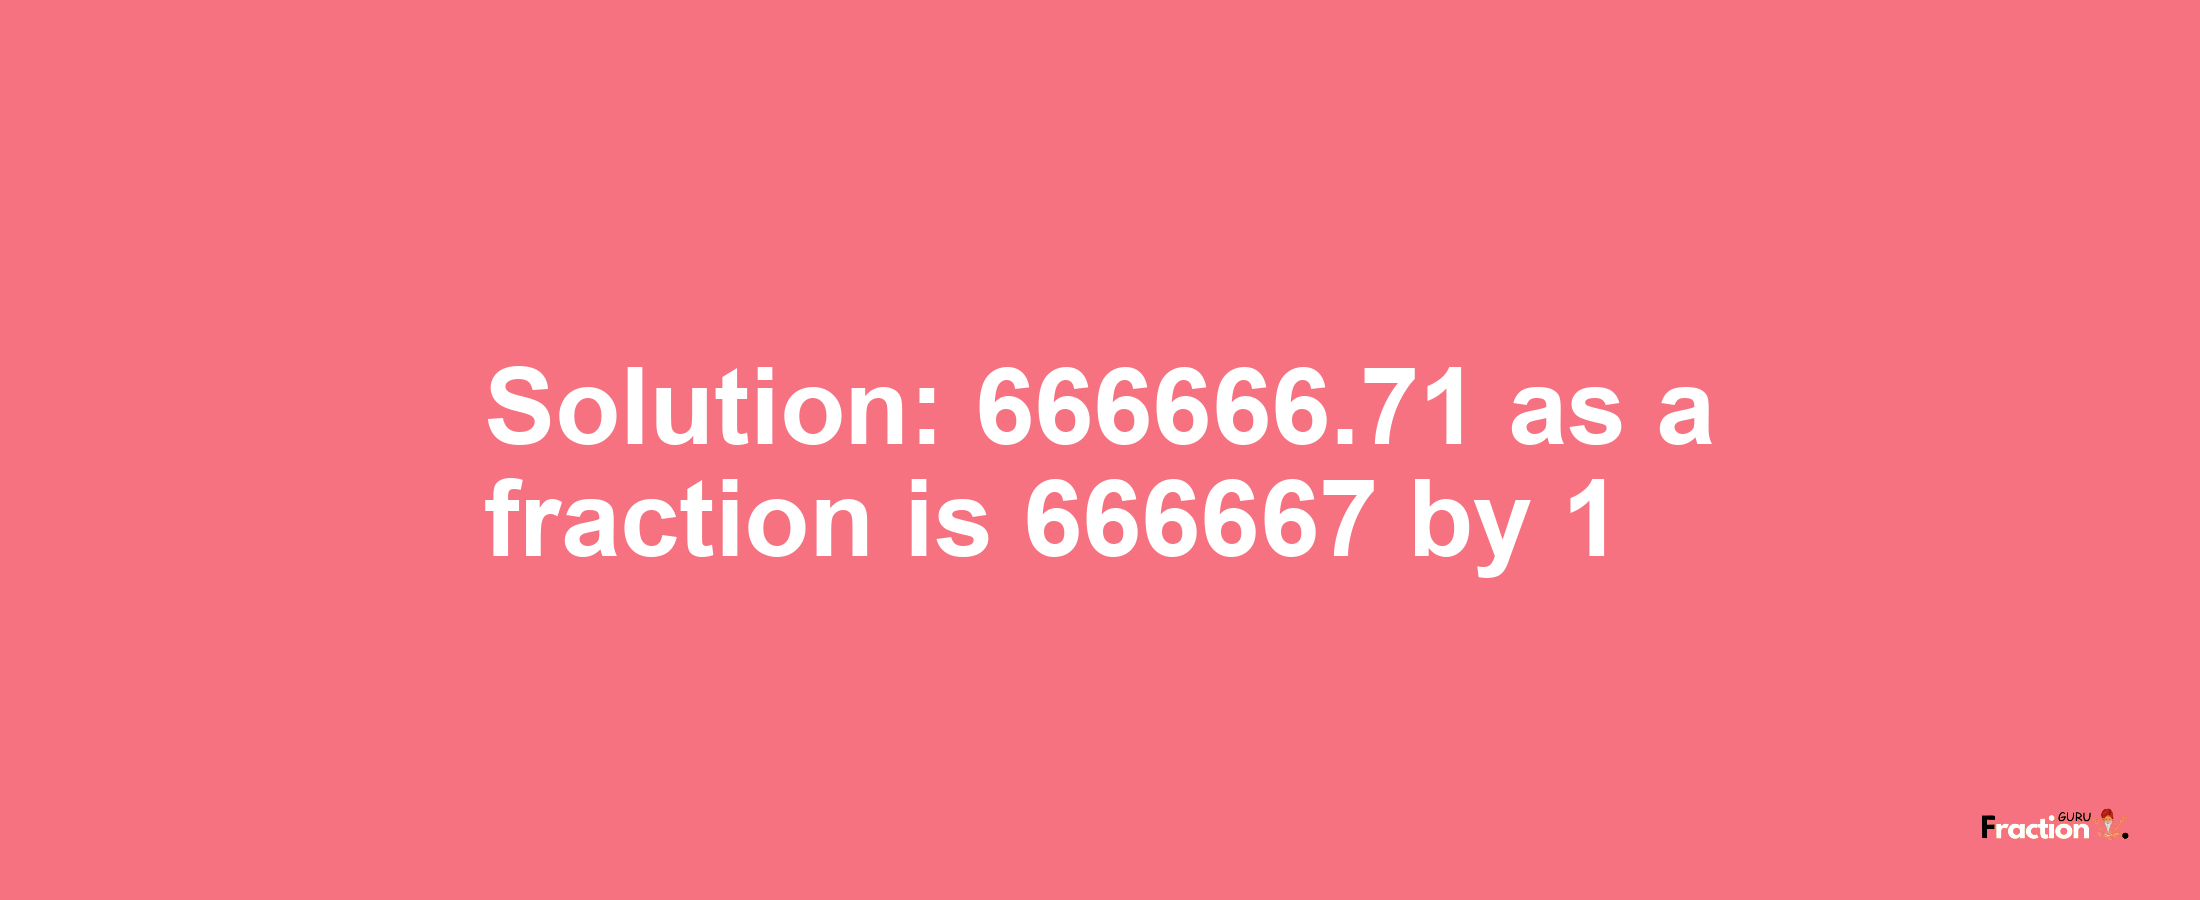 Solution:666666.71 as a fraction is 666667/1